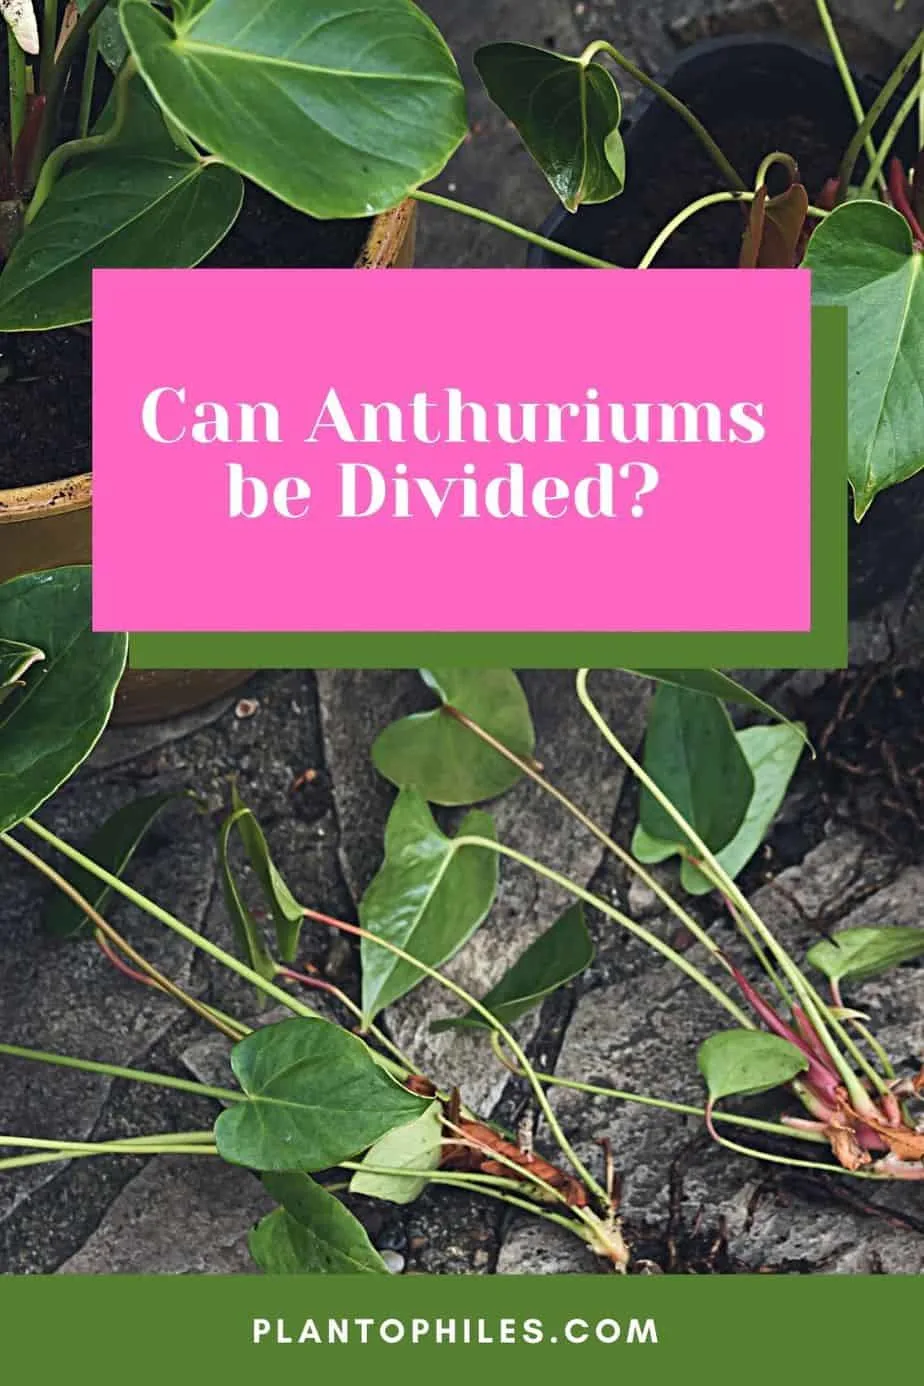 Can Anthuriums be Divided?